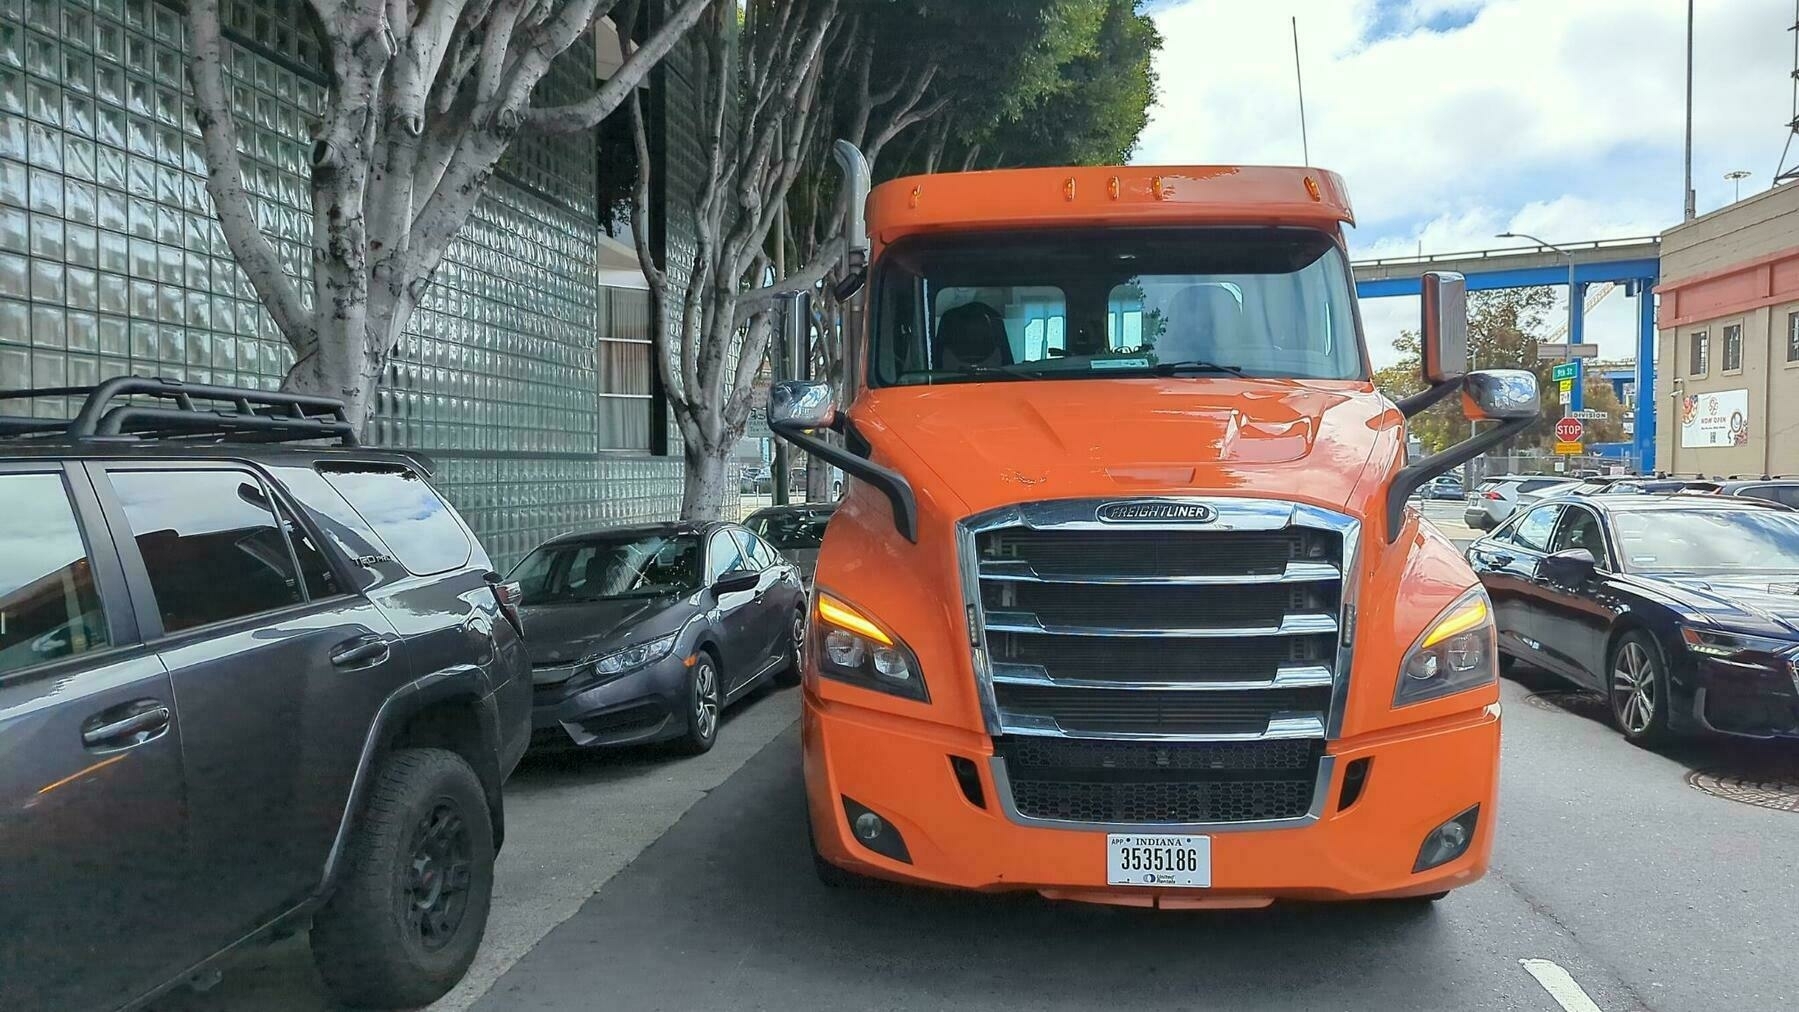 A bright orange painted flatbed Freightliner truck with Indiana plates sits in traffic beside a row of parked vehicles and tall well manicured trees and a building with a large glass bricked first floor lobby Thursday May 12th 2023 on Ninth Street in San Francisco, California.